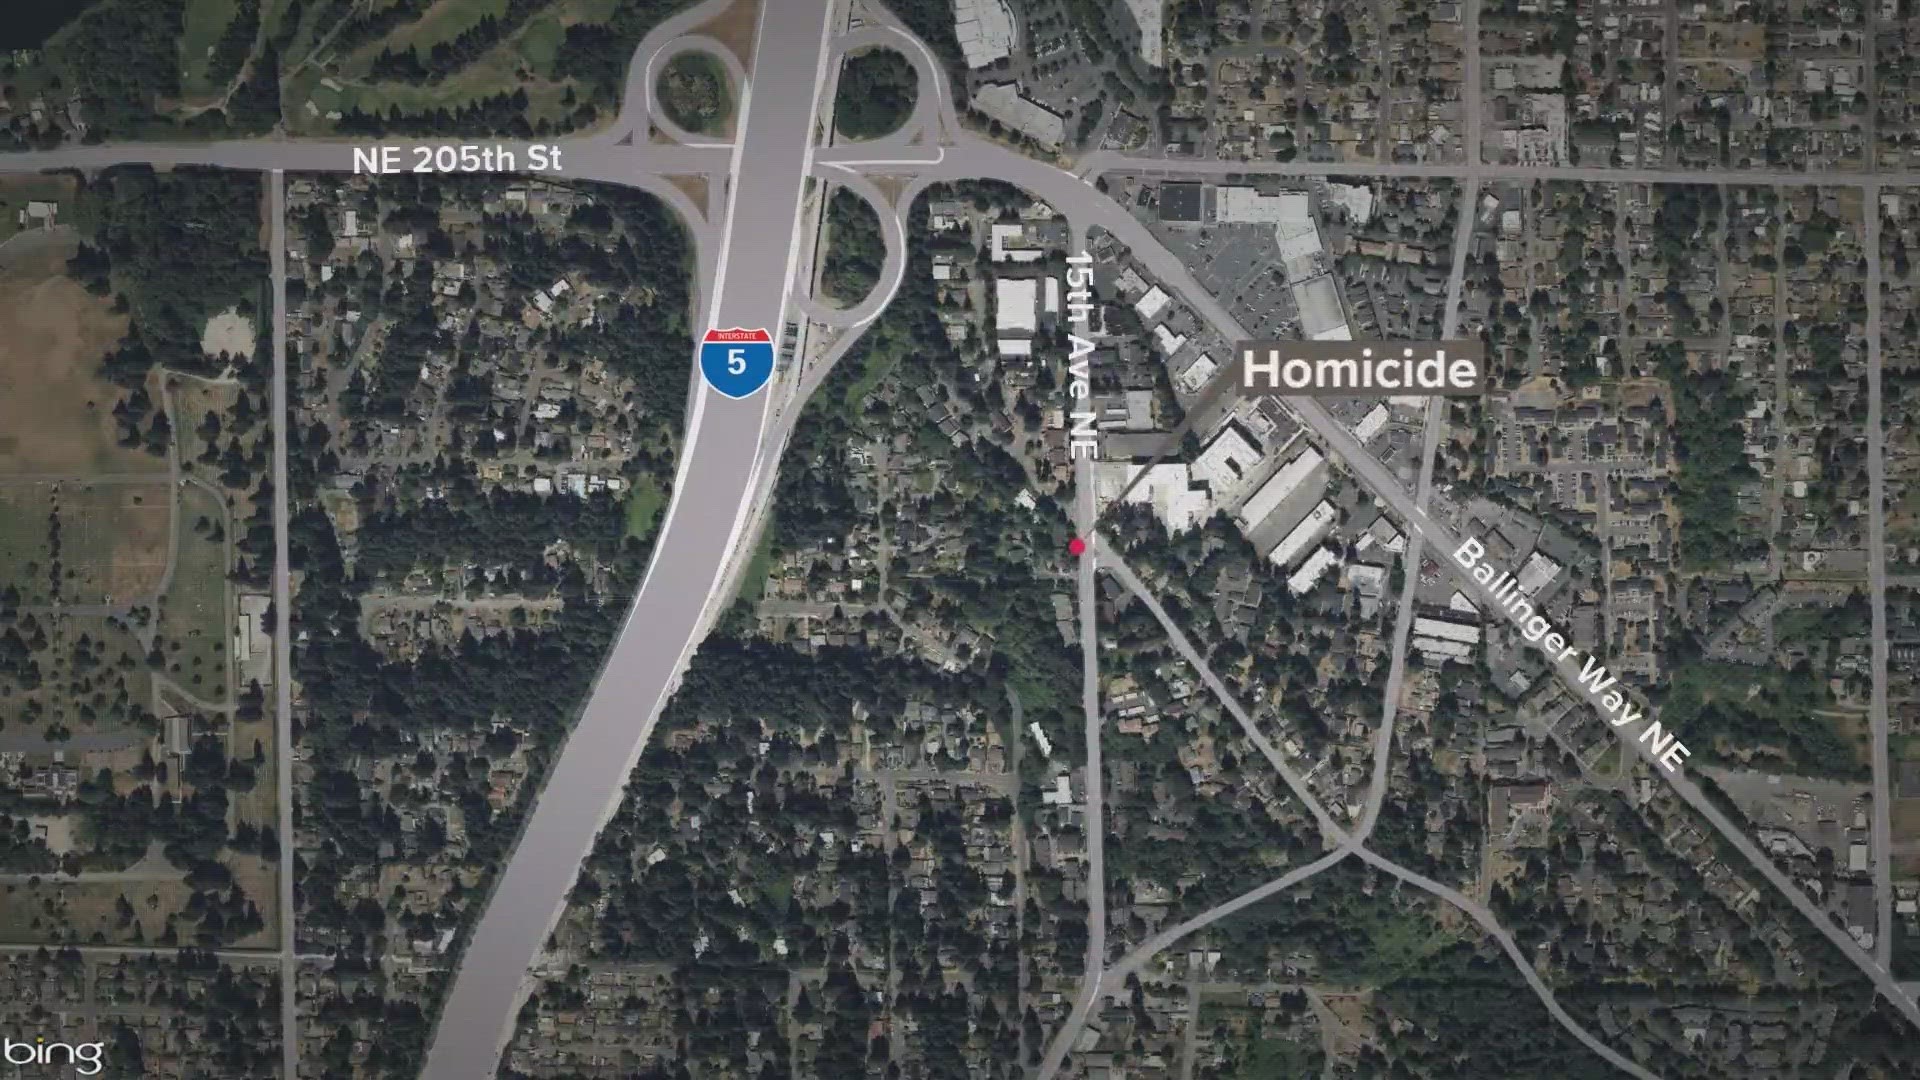 A man in his 20's was found bleeding near 200th and 15th Ave NE in Shoreline Monday night. That man died from his wounds.